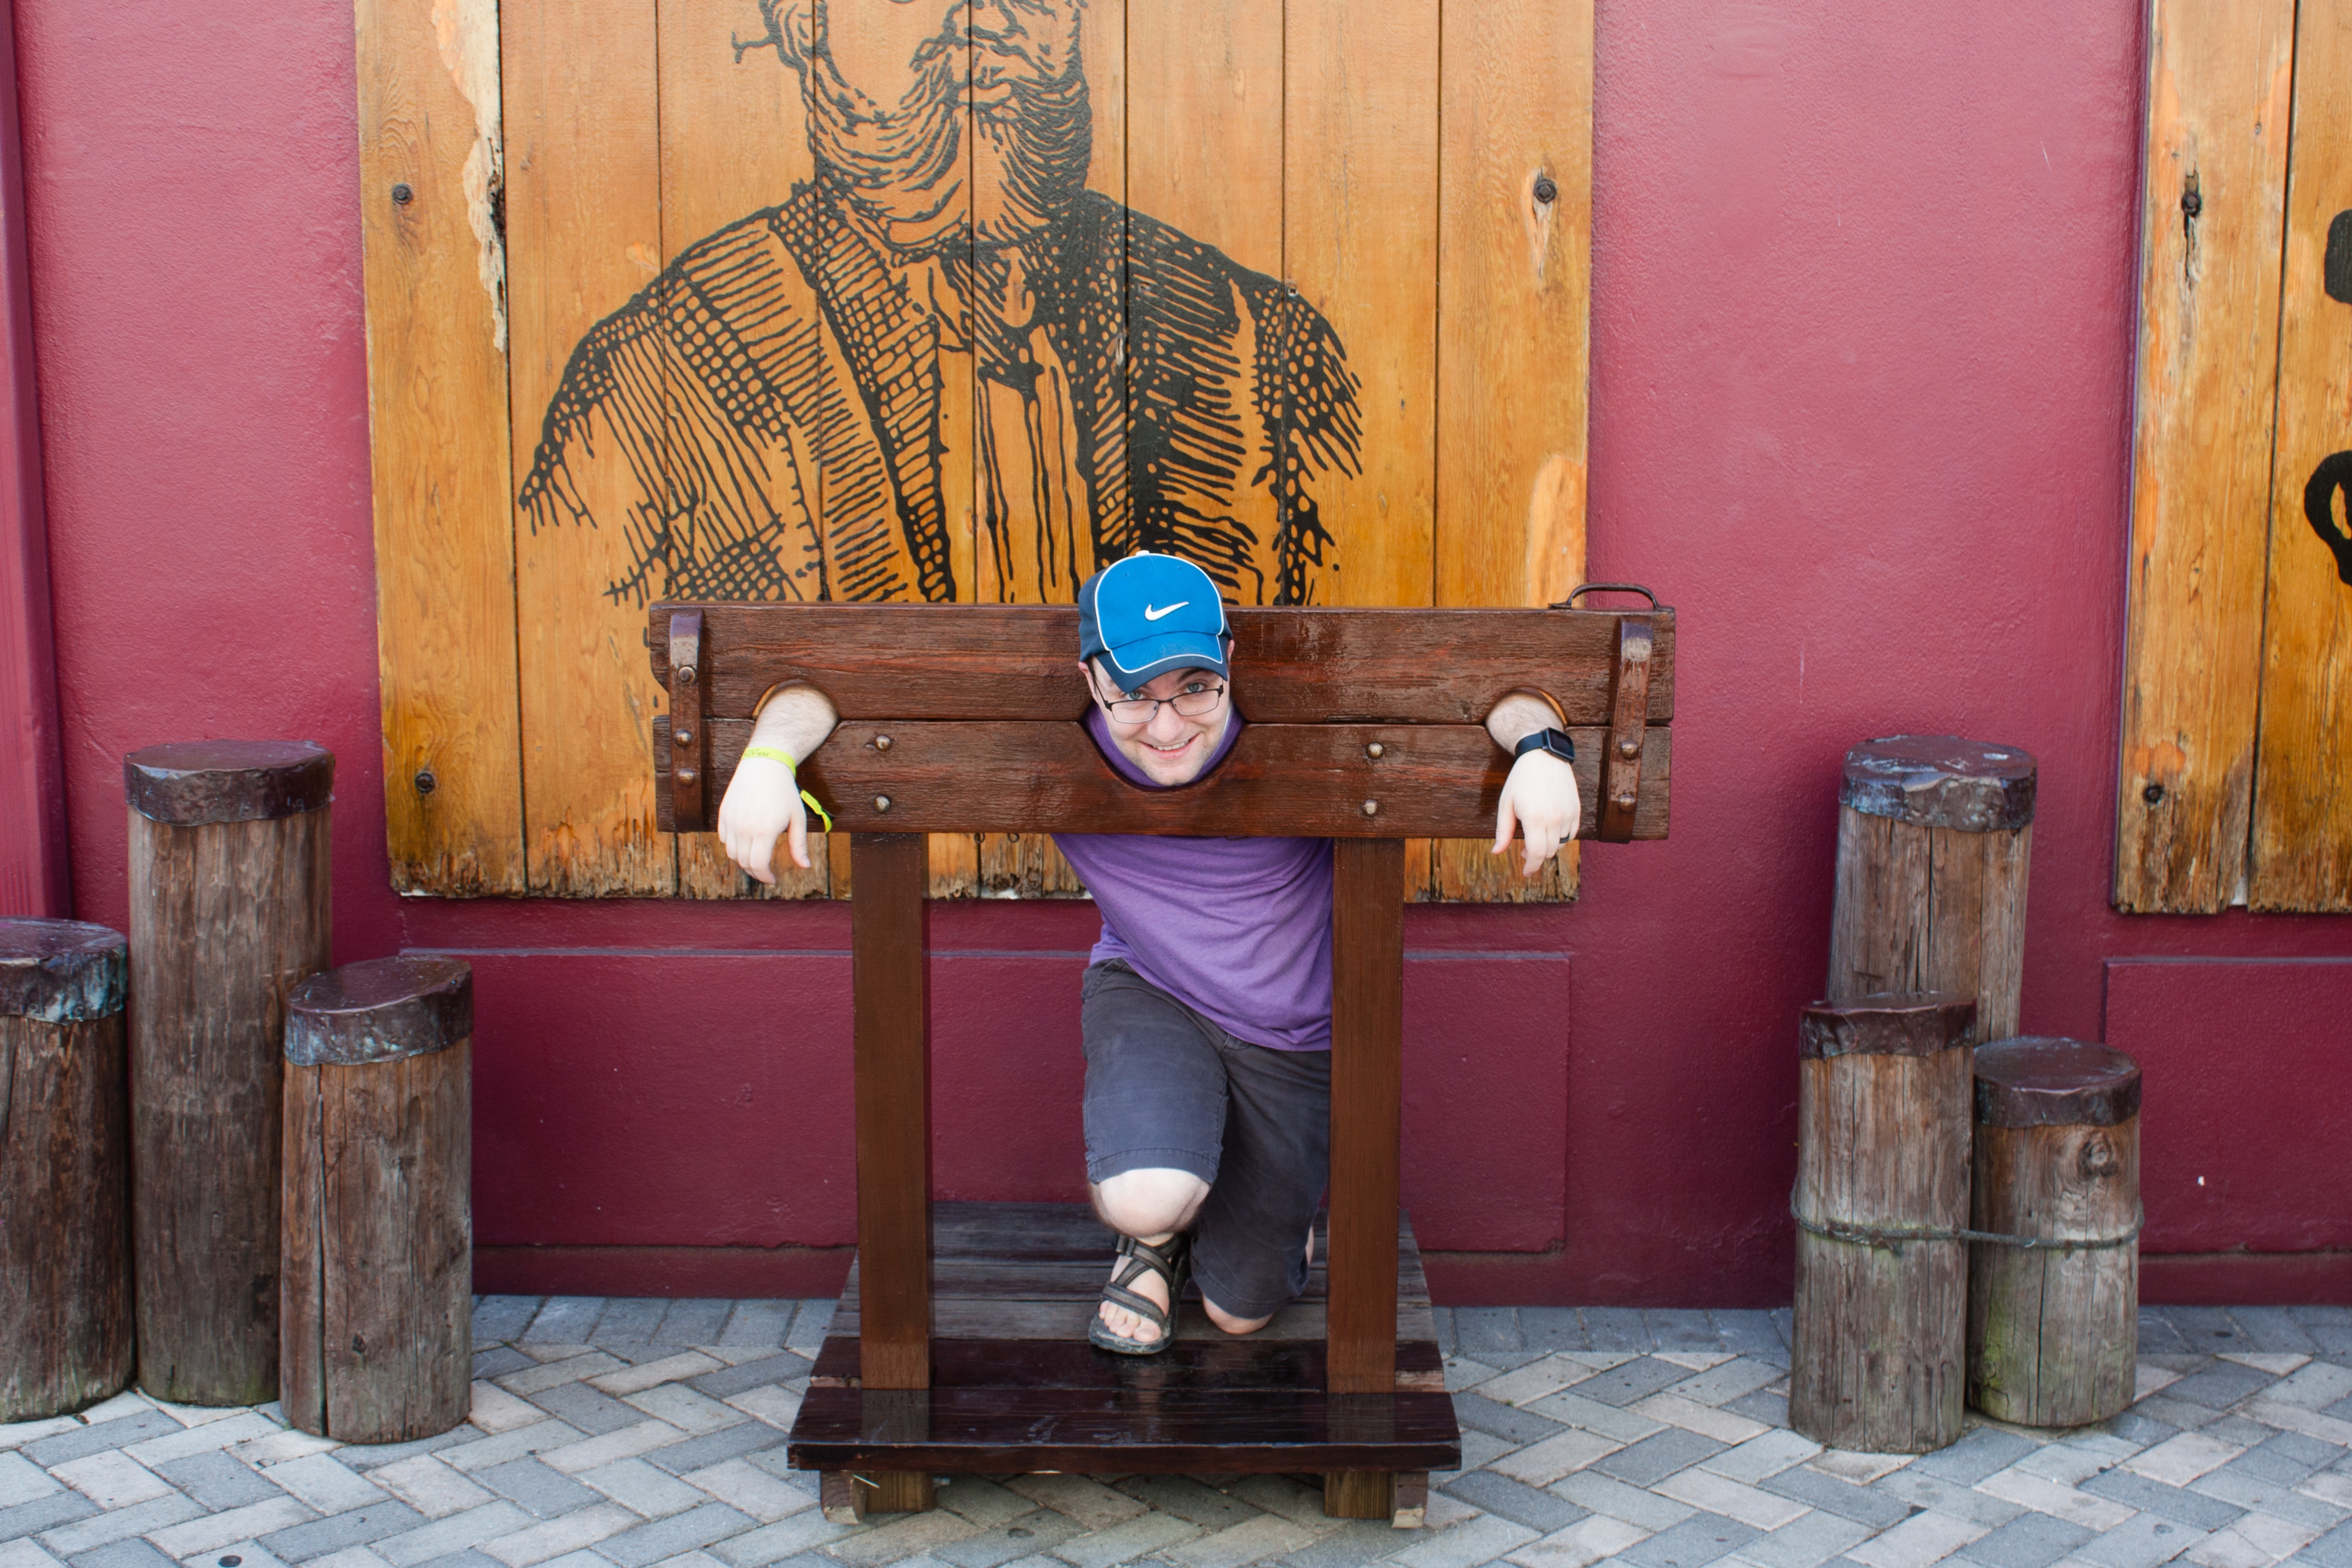 Ben in the stocks at the Pirates of Nassau museum